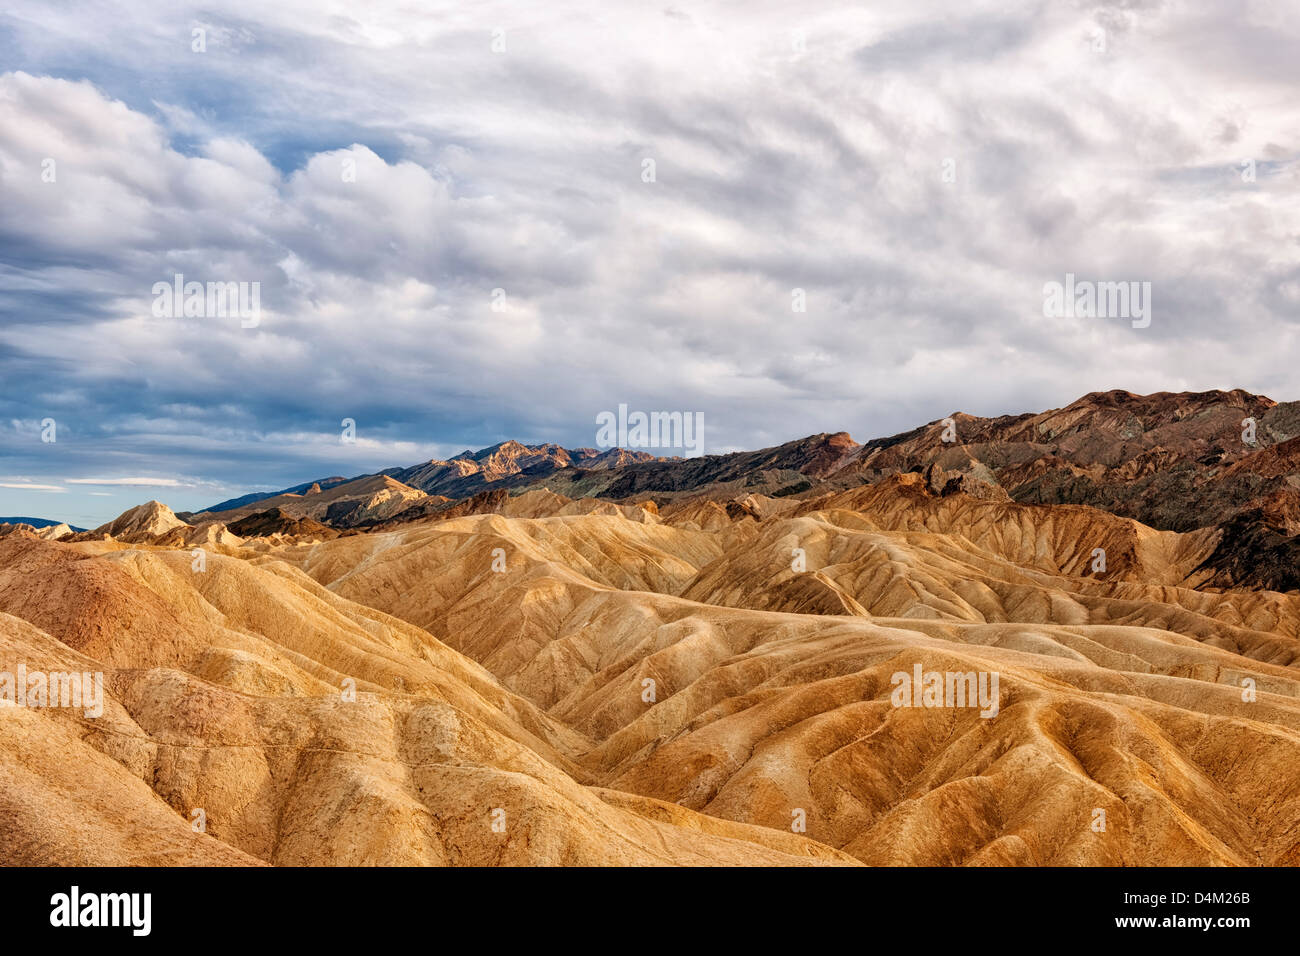 Dappled evening light bathes the badlands of Golden Canyon and California's Death Valley National Park. Stock Photo